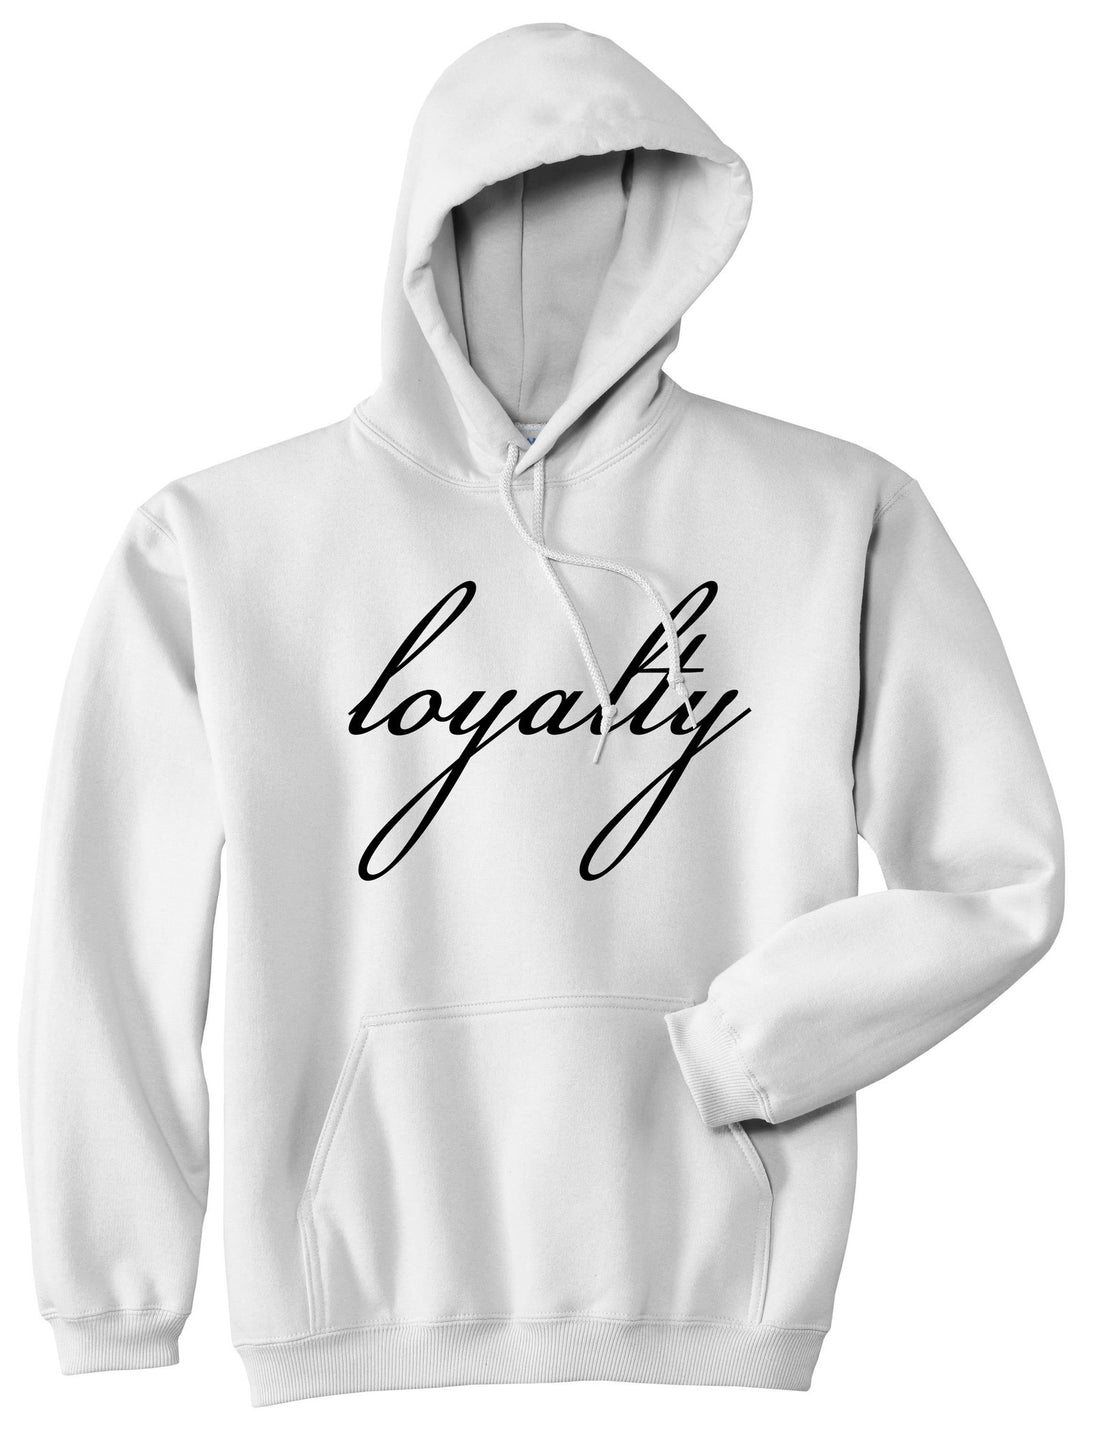 Loyalty Respect Aint New York Hoes Pullover Hoodie Hoody in White by Kings Of NY